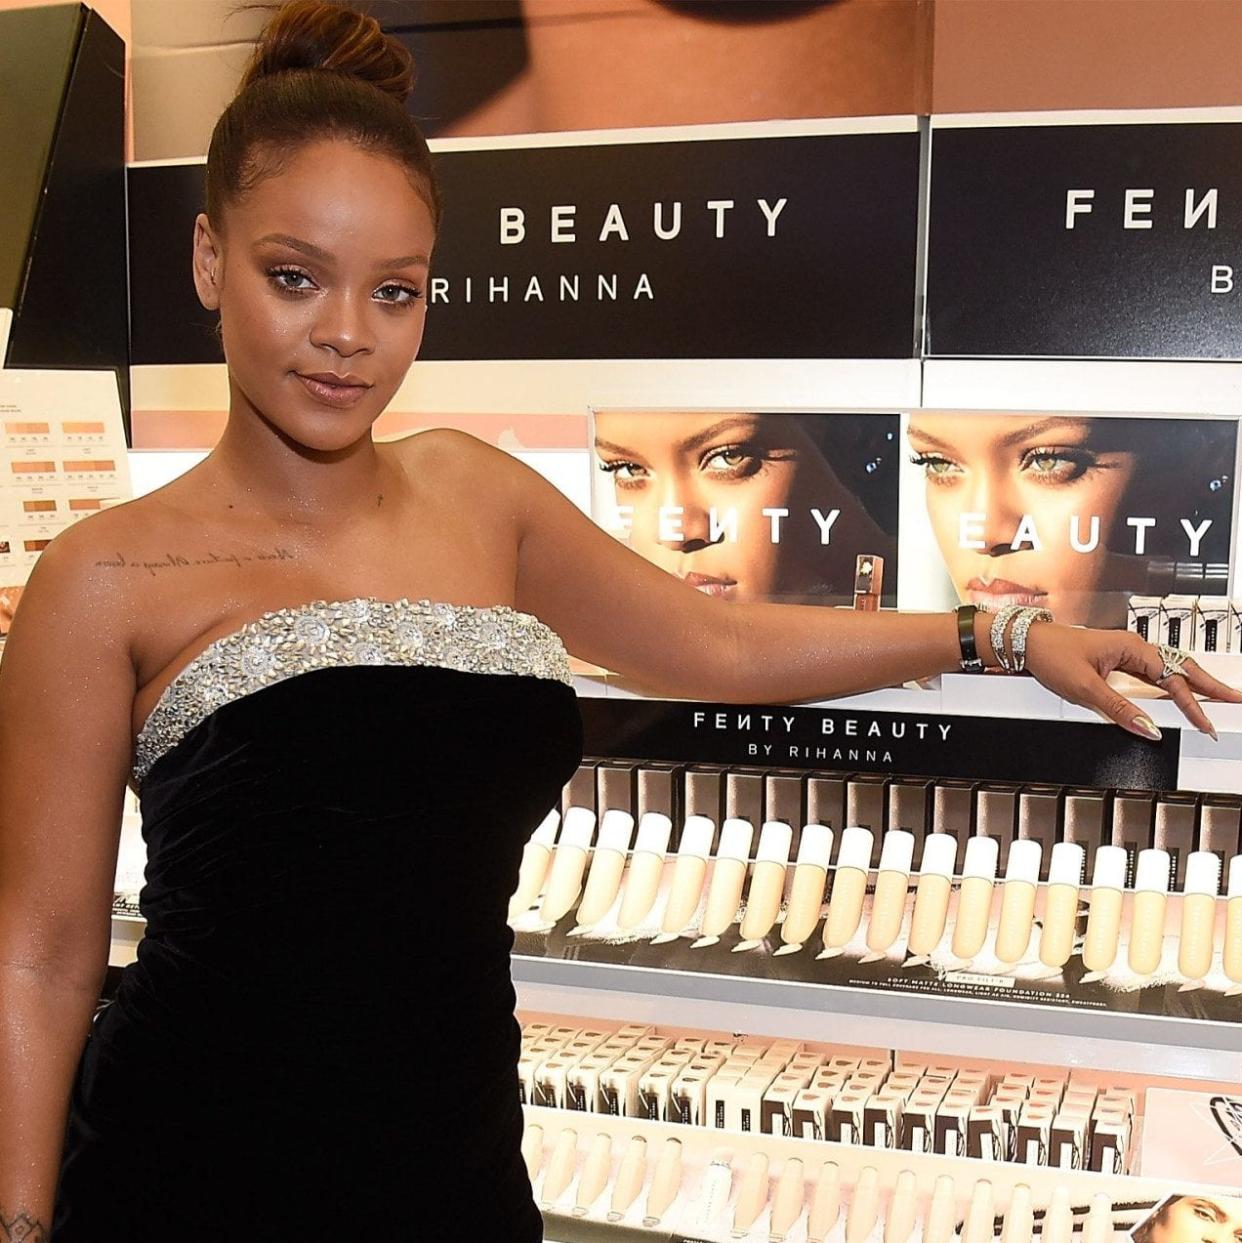 Rihanna launches her Fenty Beauty range at Sephora in Times Square, New York.  - Getty Images North America